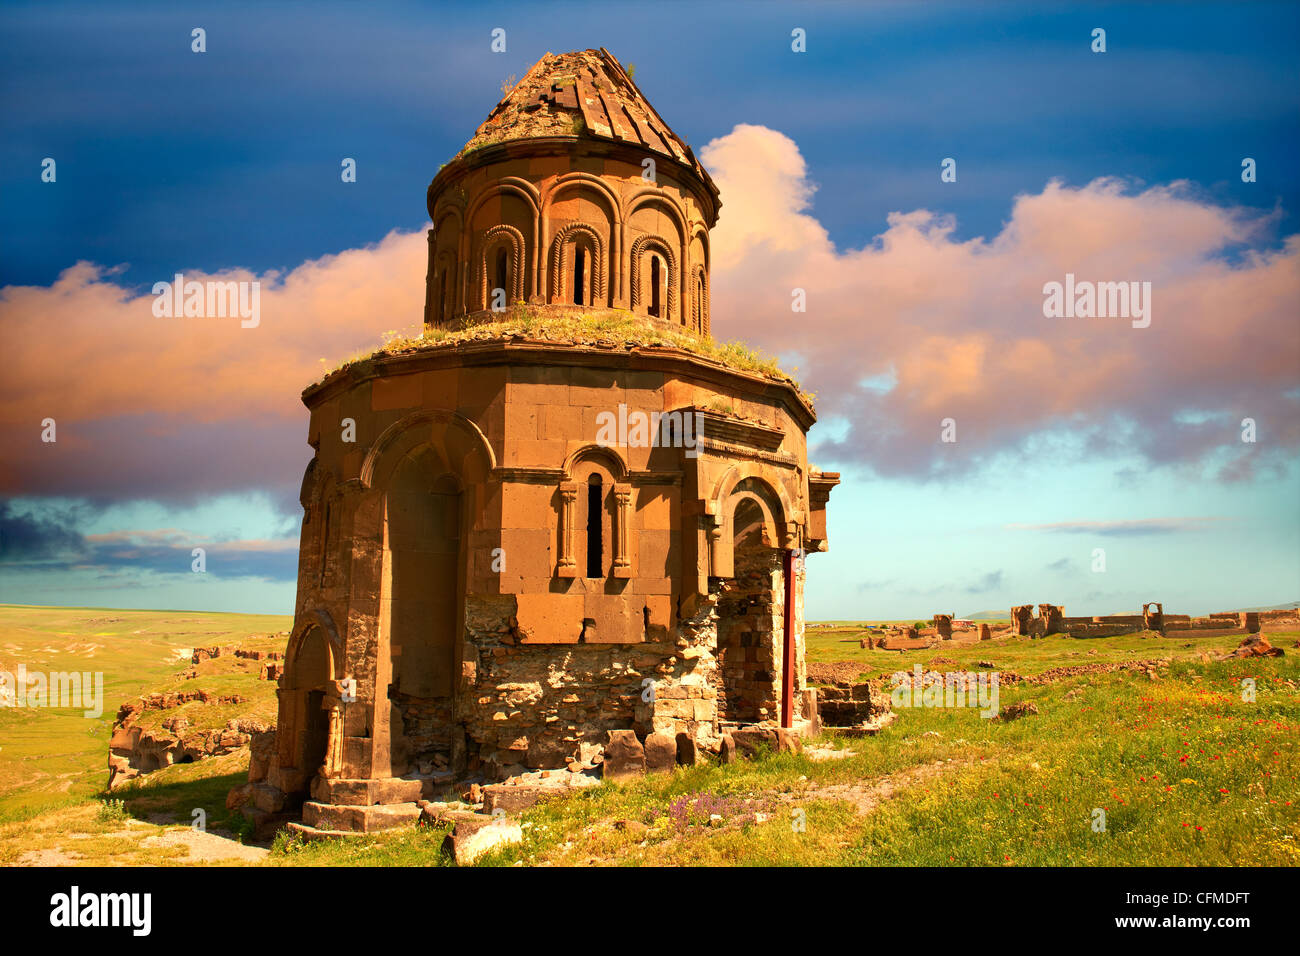 The Armenian church of St Gregory of the Abughamrents, Ani archaelogical site on the Ancient Silk Road , Kars , Anatolia, Turkey Stock Photo